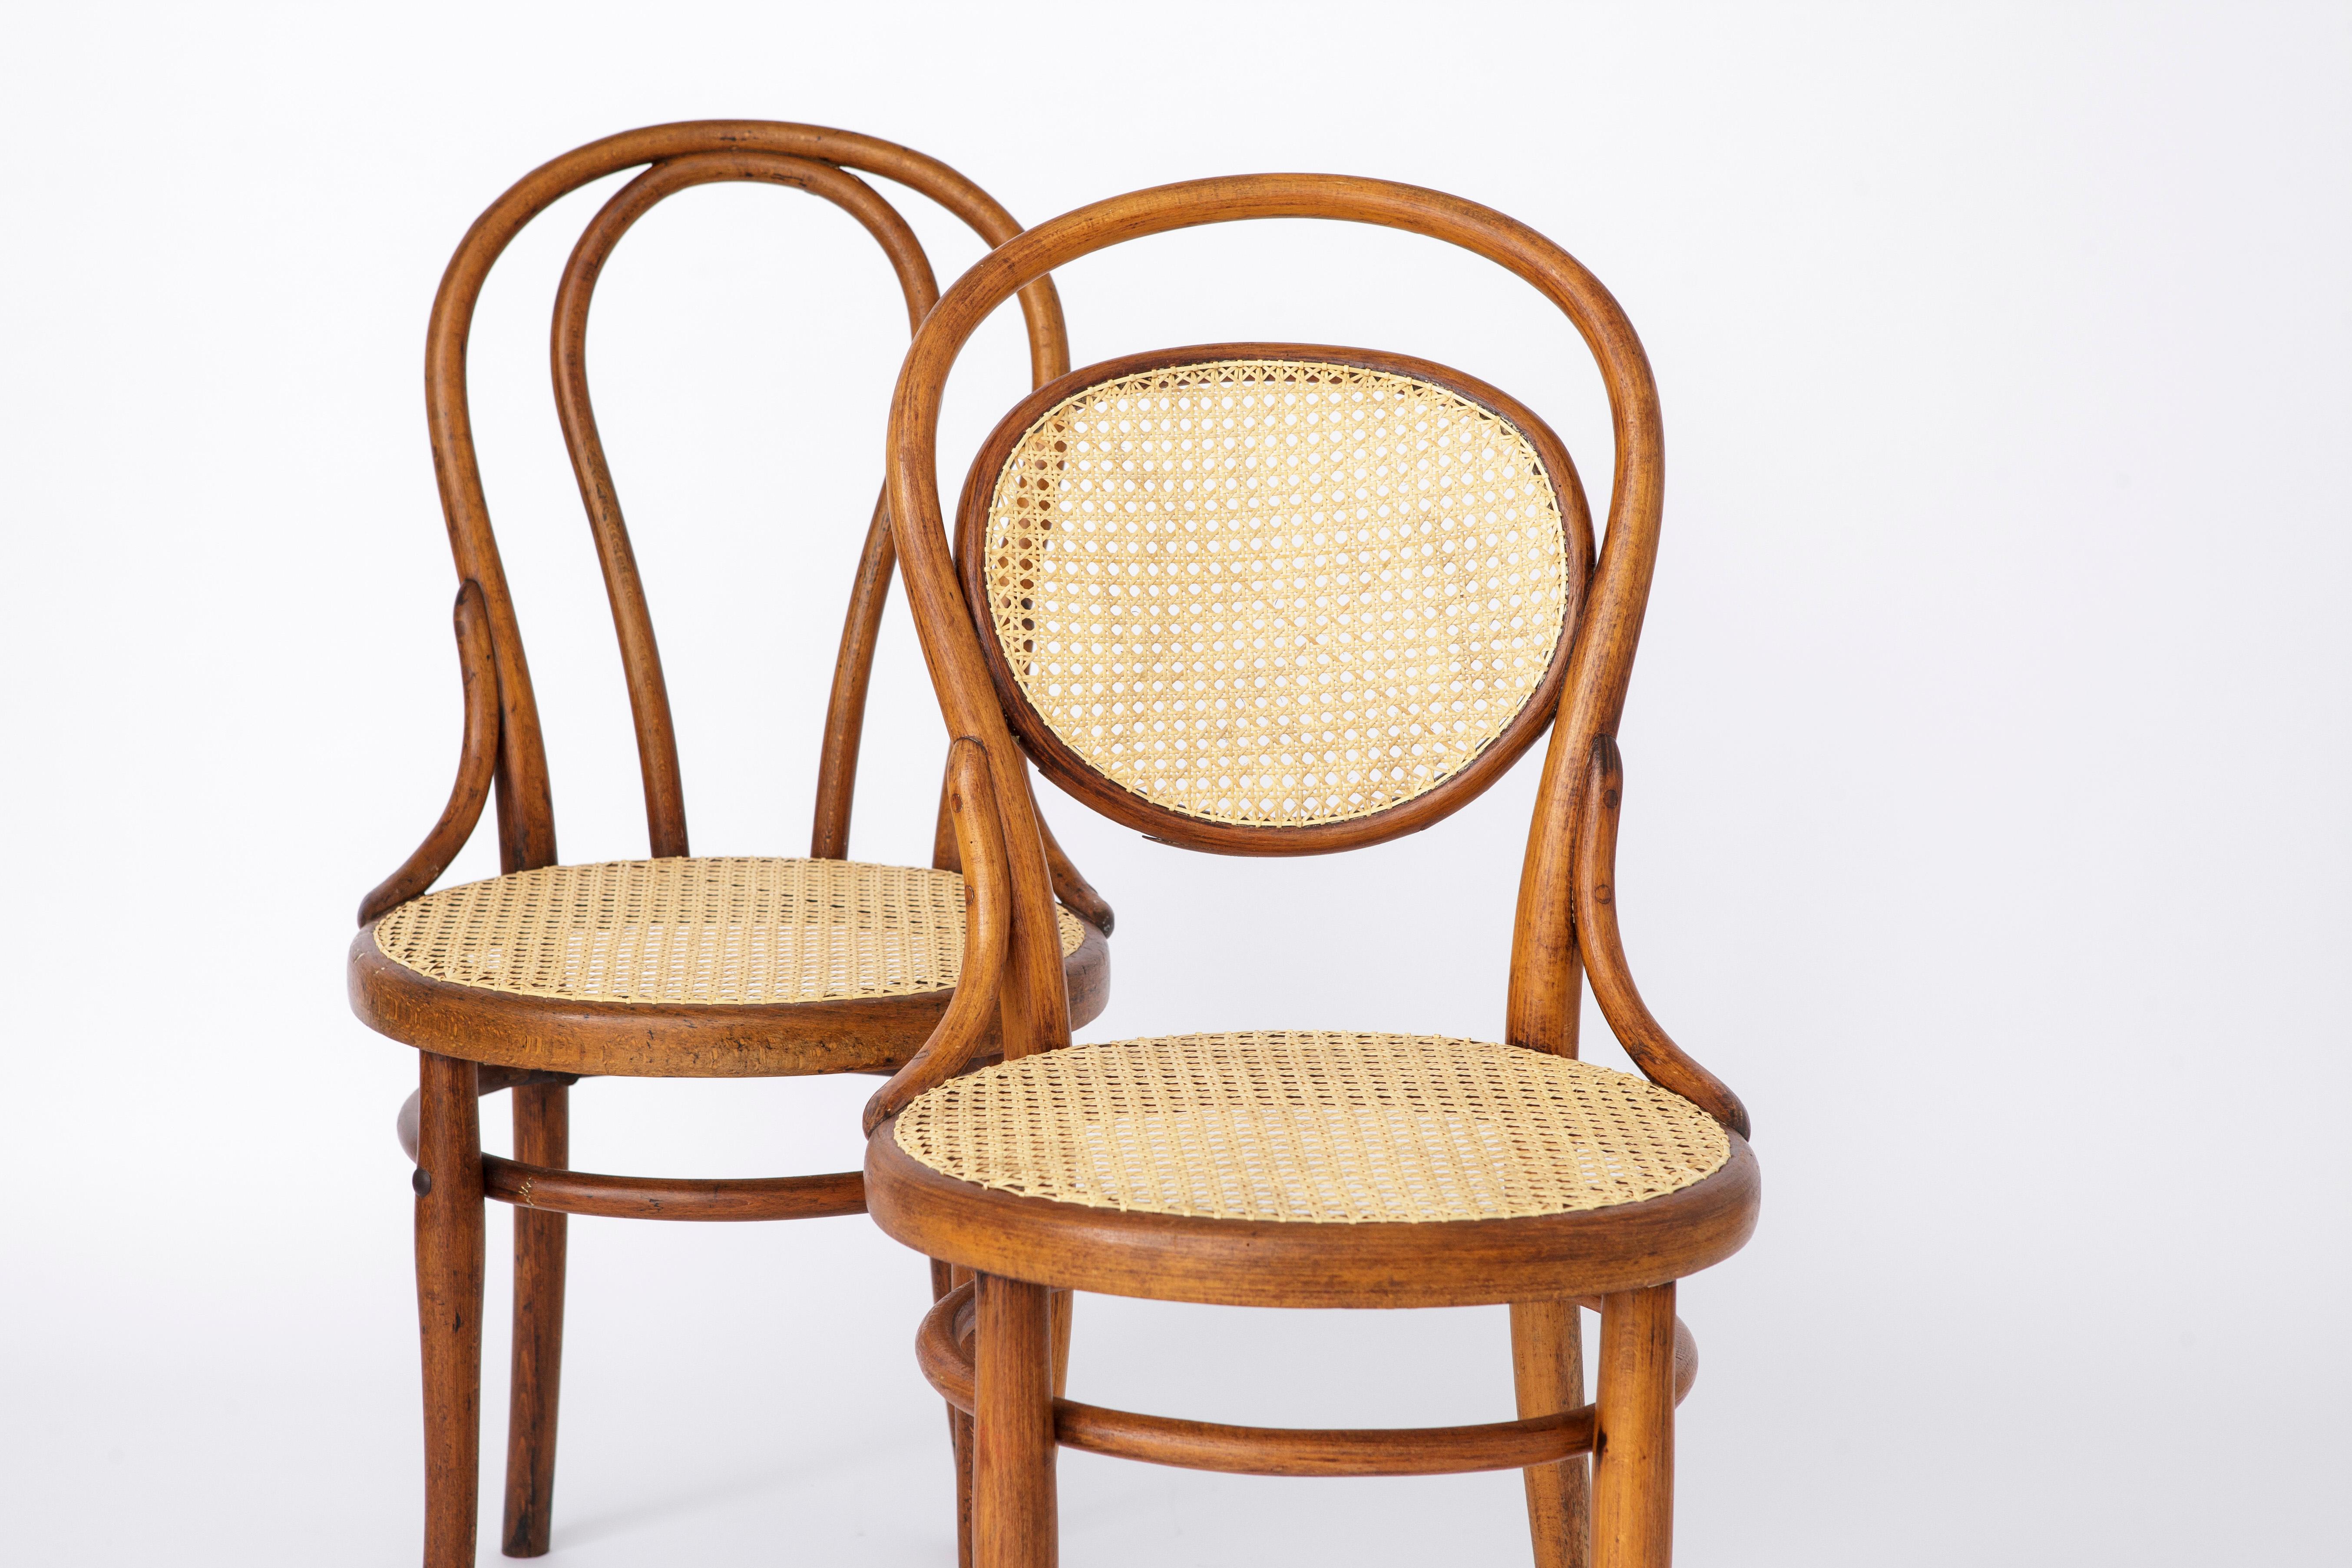 Pair of Thonet chairs, model No. 18 + model No. 215. 
Design by Michael Thonet in 1859. 
Production period approx. 1920-1950s. 

Sturdy beech bentwood chair  frame. Refurbished and oiled. 
Renewed Danish cane seat. Manufacturer's mark under the